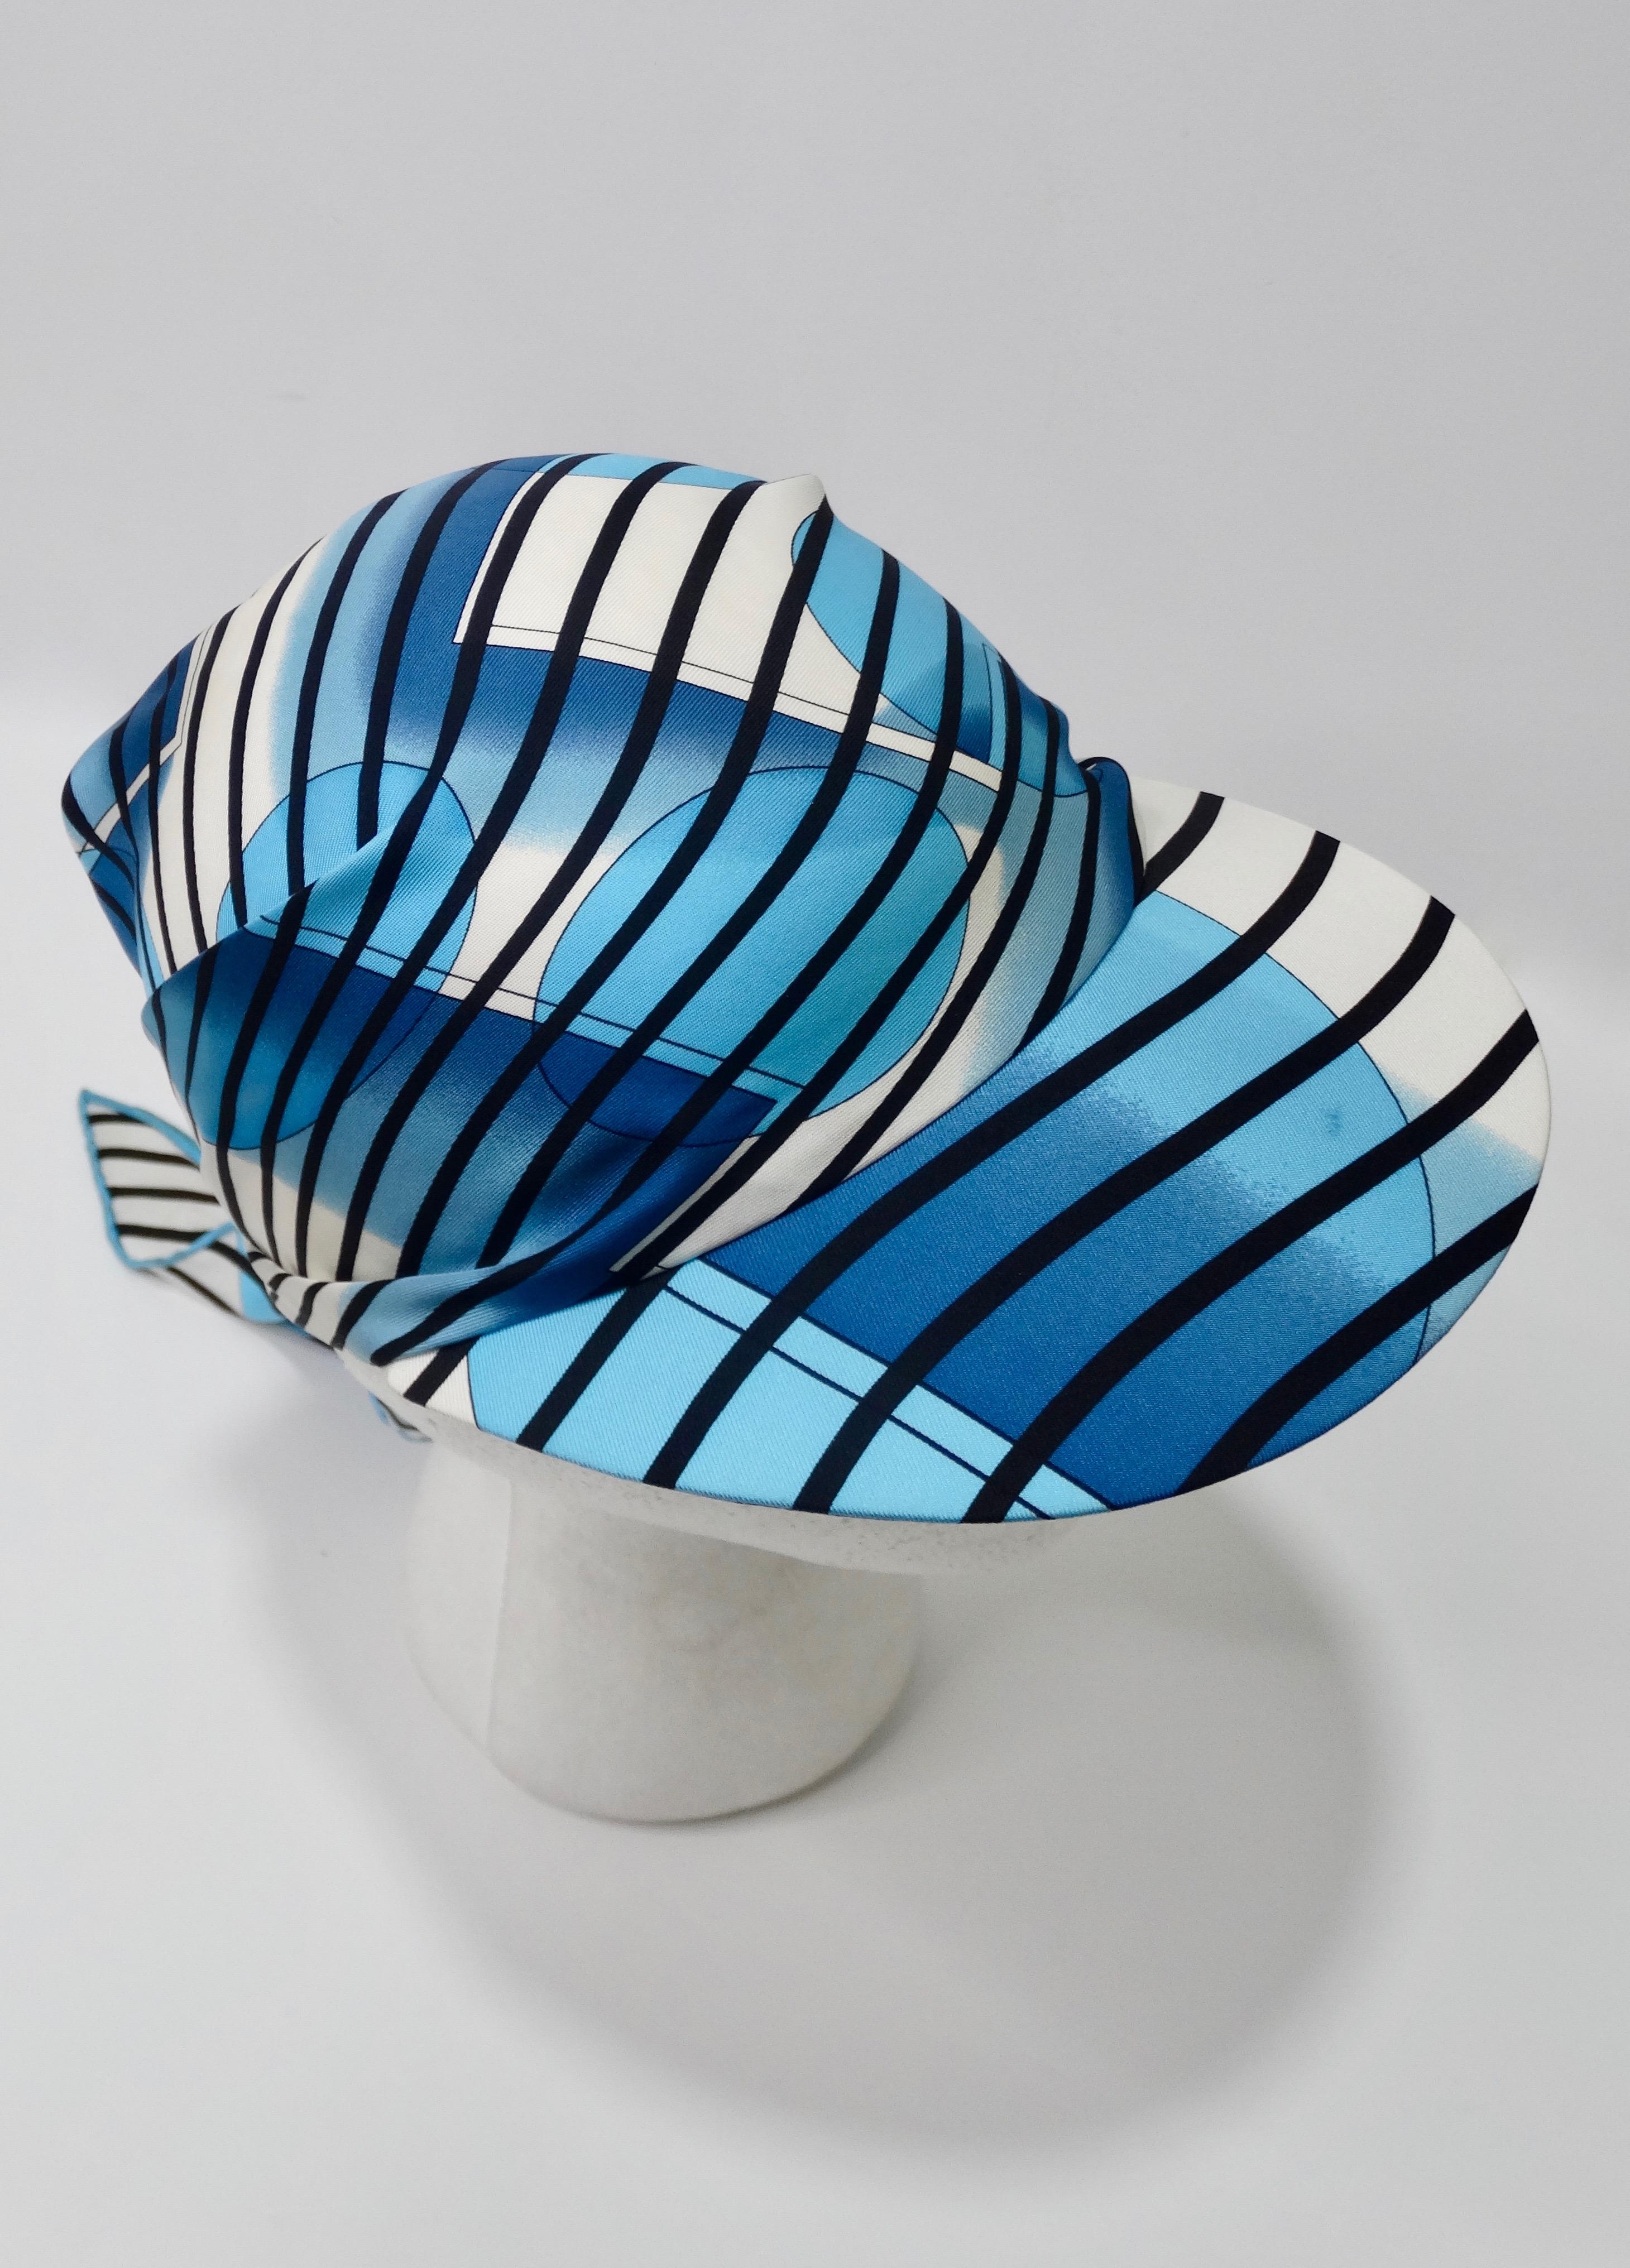 Relax by the beach or pool in style with this adorable Hermes scarf cap! Designed by Bali Barret for Hermes circa 2005, the scarf displays bold black stripes, aqua bubbles and a large H with a 